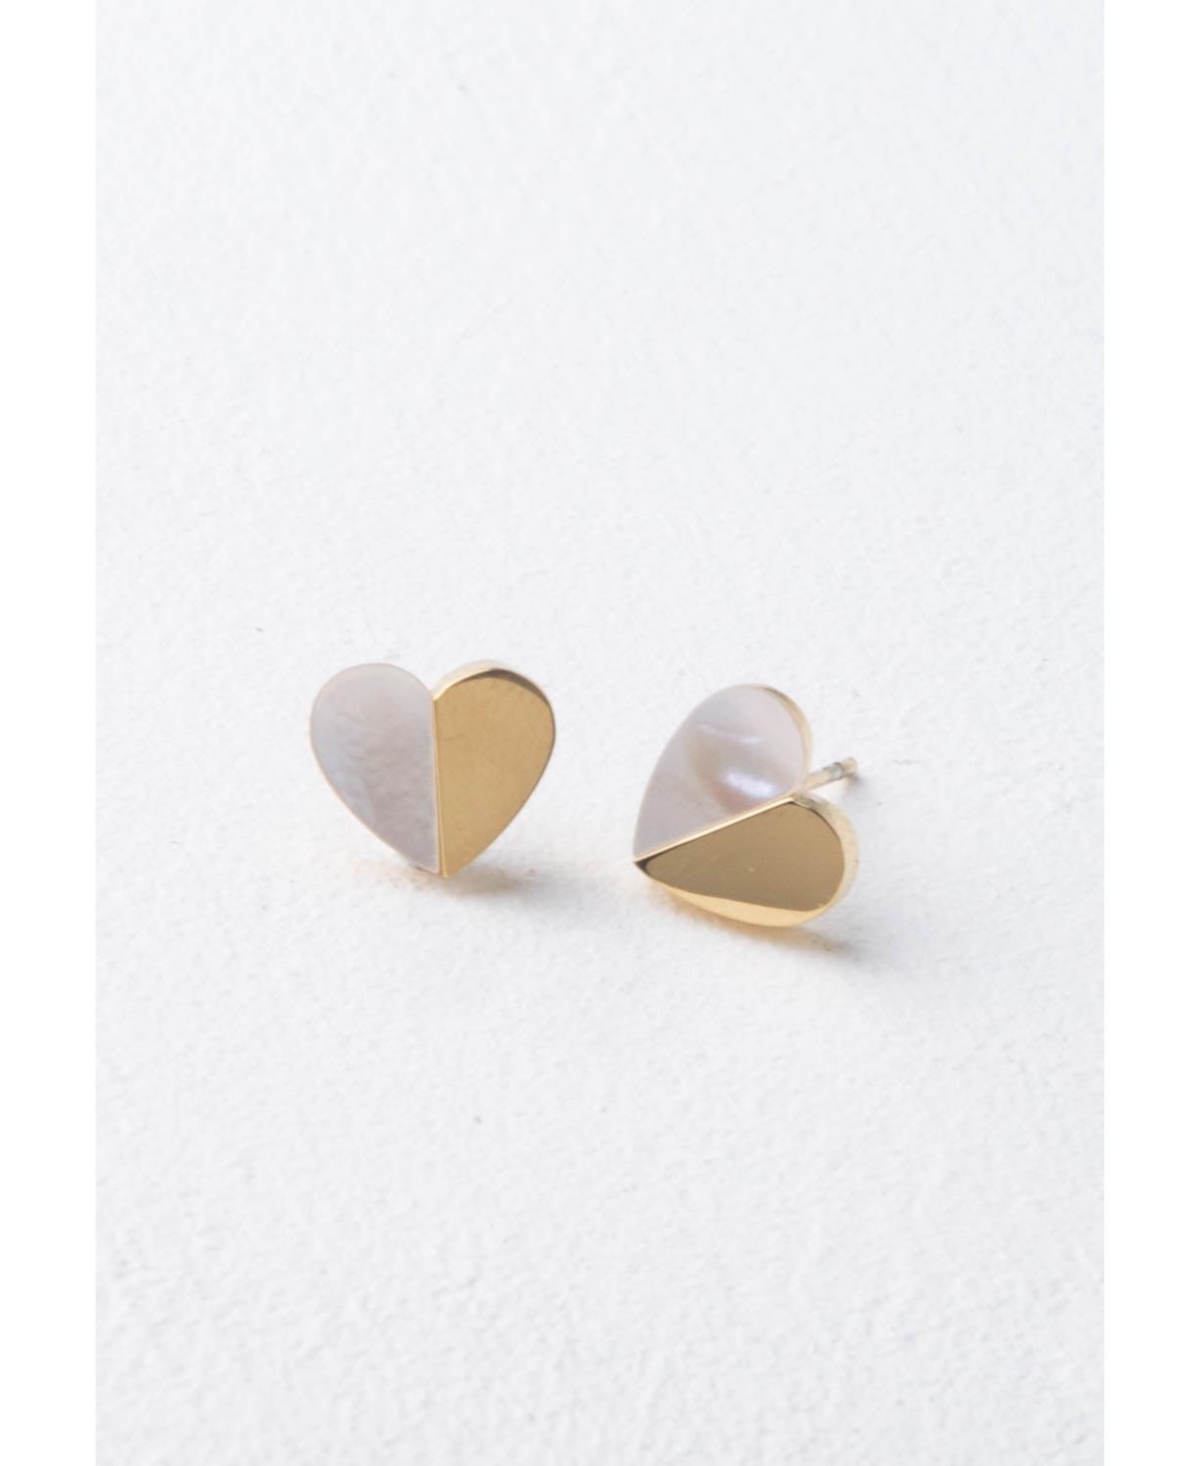 Give Hope Earrings - Shimmering mother of pearl